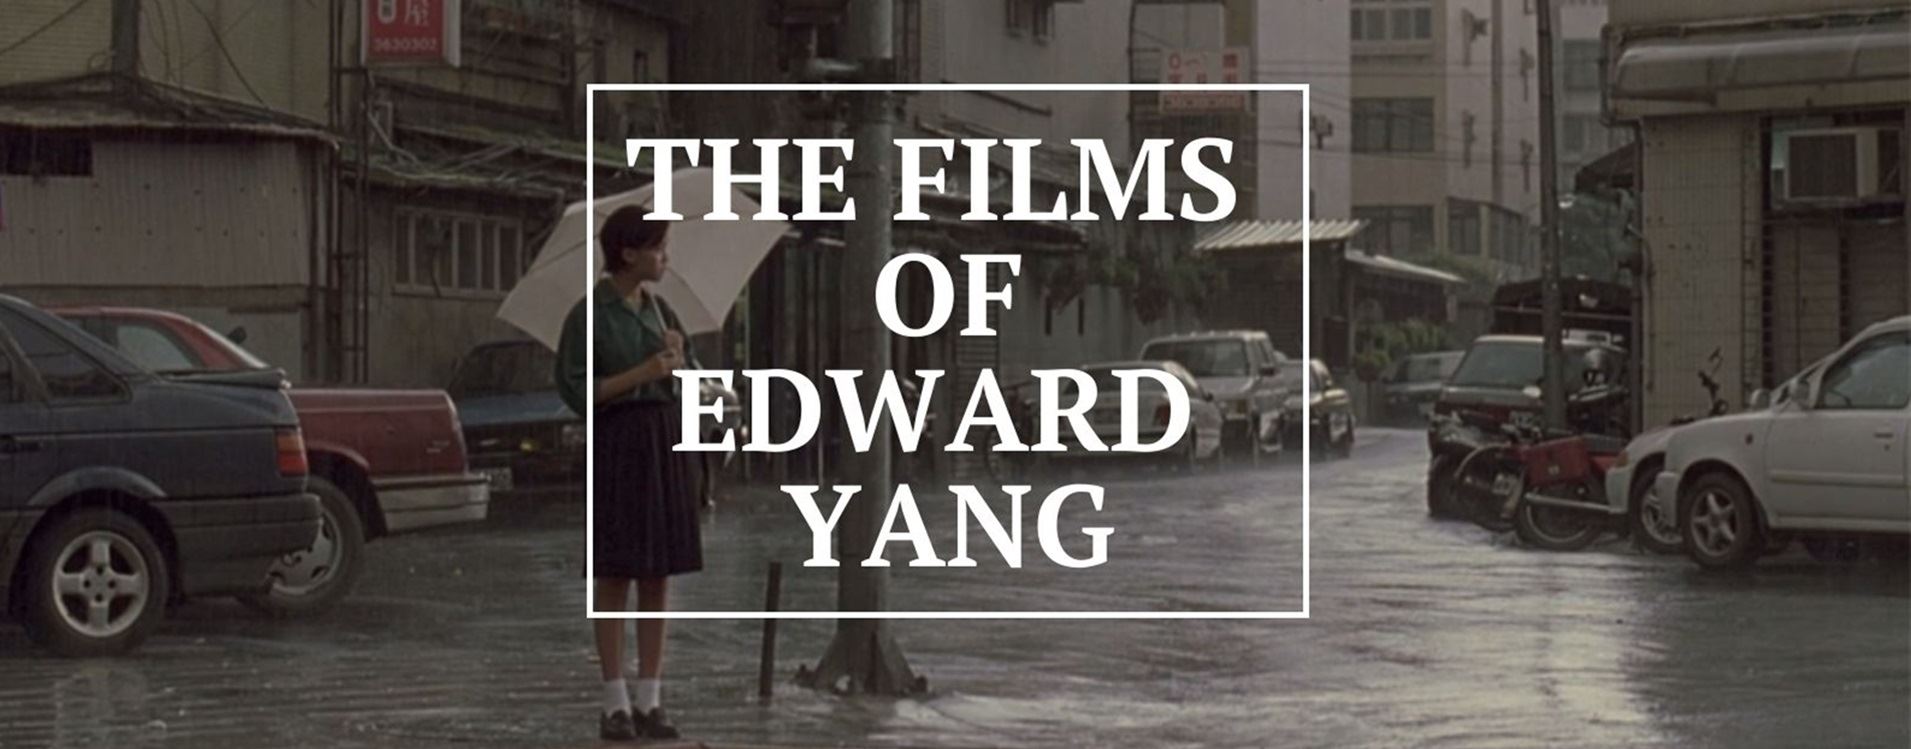 The Films of Edward Yang Presented by the Seattle International Film Festival to Revive the Restored 4K Films of “New Taipei Trilogy”